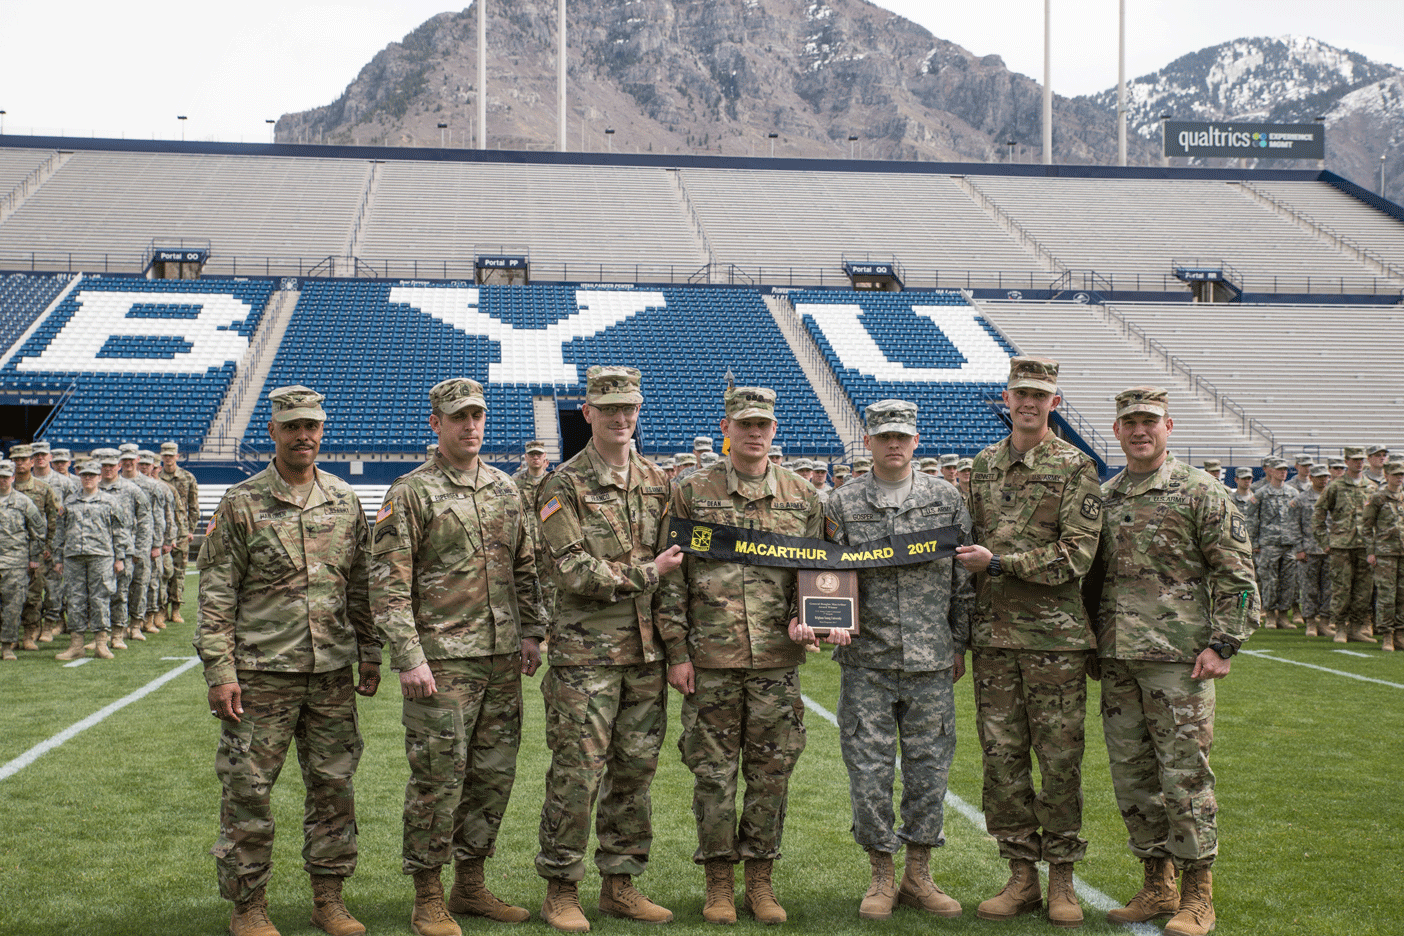 Members of BYU Army ROTC stand on the field in LaVell Edwards Stadium holding the banner for the MacArthur Award